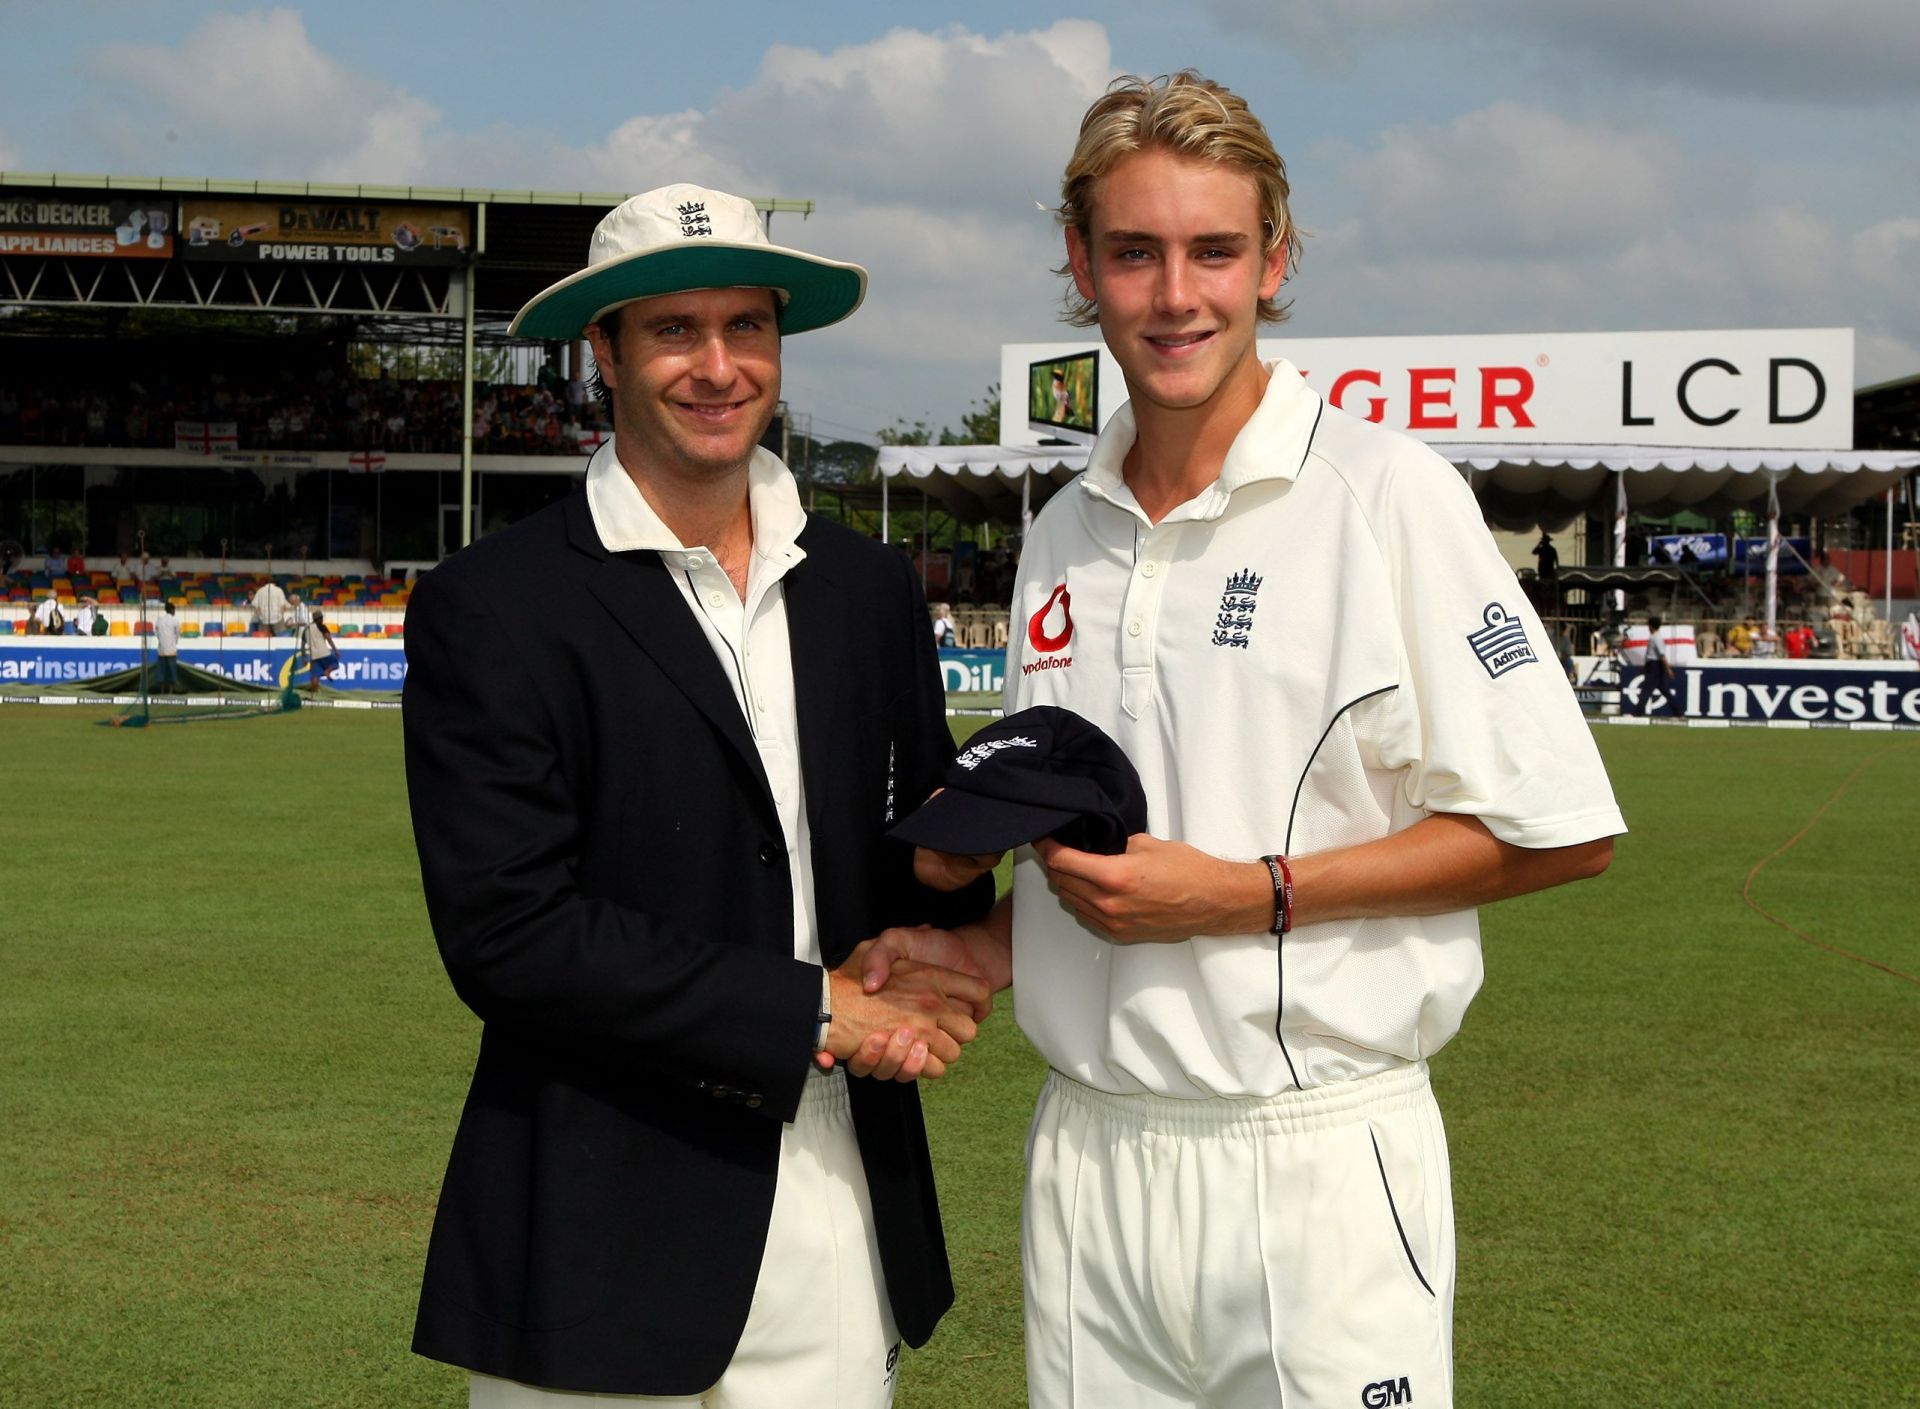 Michael Vaughan giving the Test cap to Stuart Broad [Getty Images]